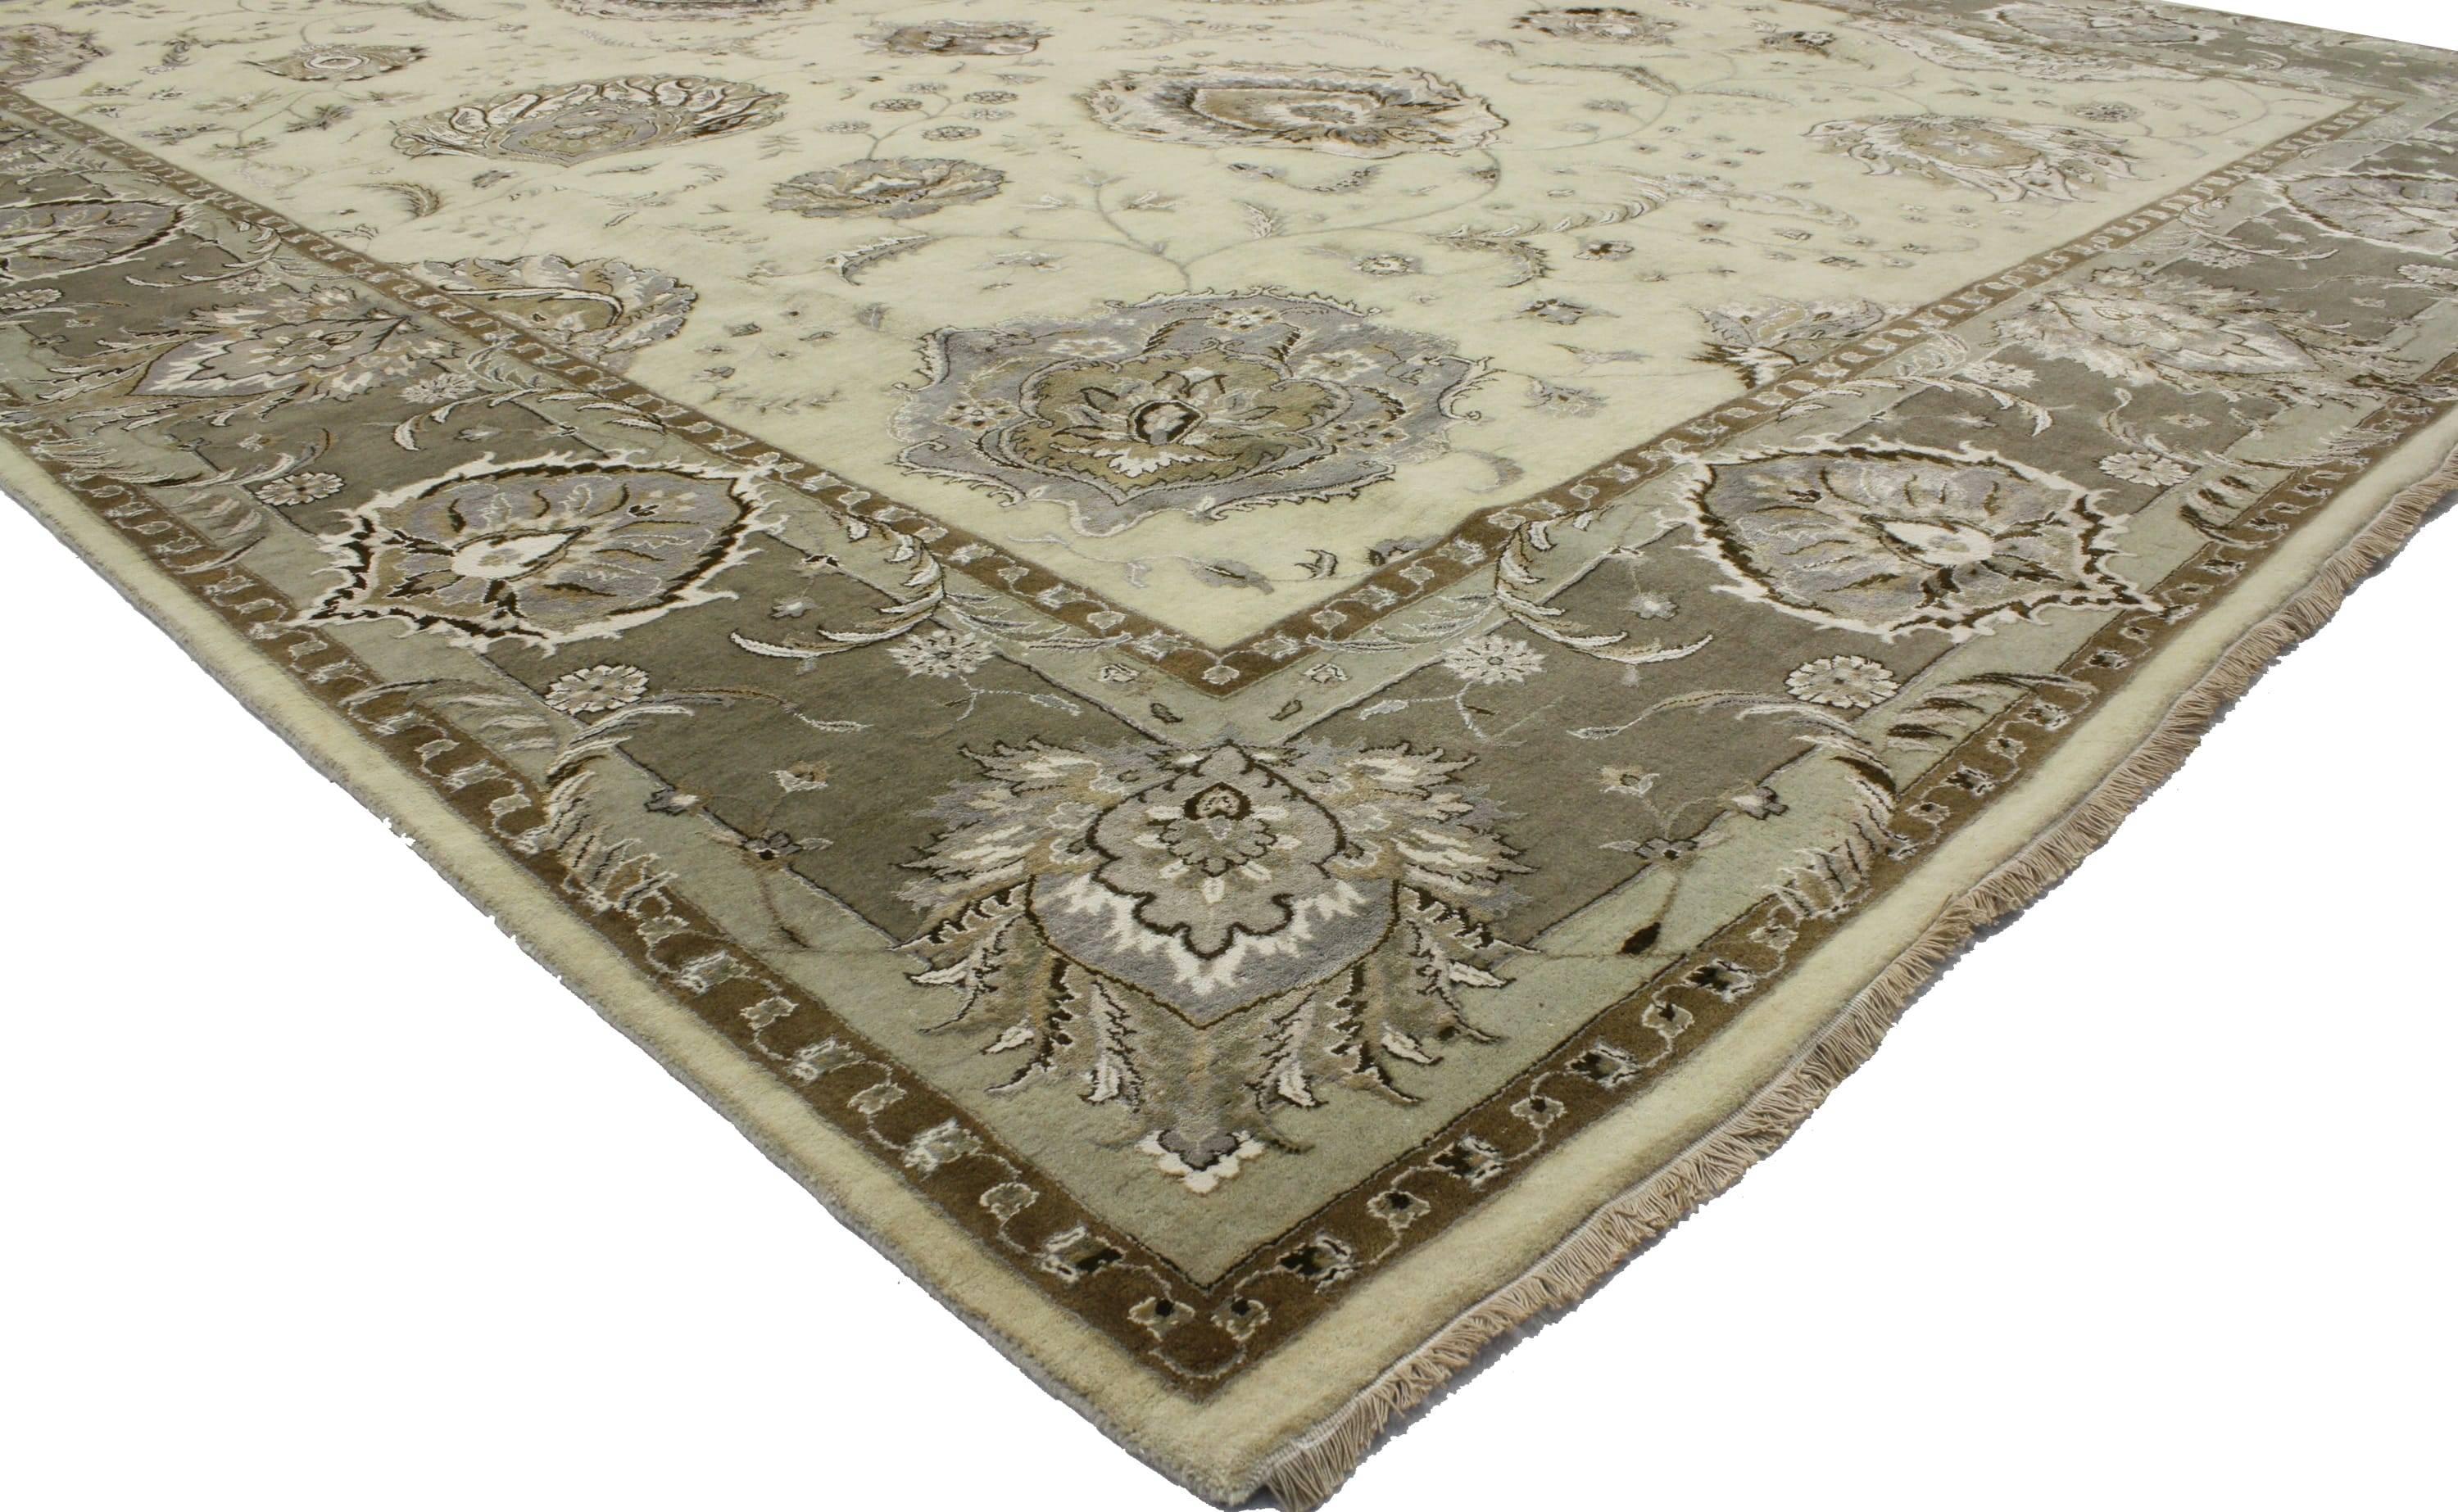 30237 New Transitional style area rug with Oushak design and neutral colors. This hand knotted wool transitional Indian rug features an all-over floral arabesque pattern spread across an abrashed field. Large palmettes, scrolling vines, blossoms,